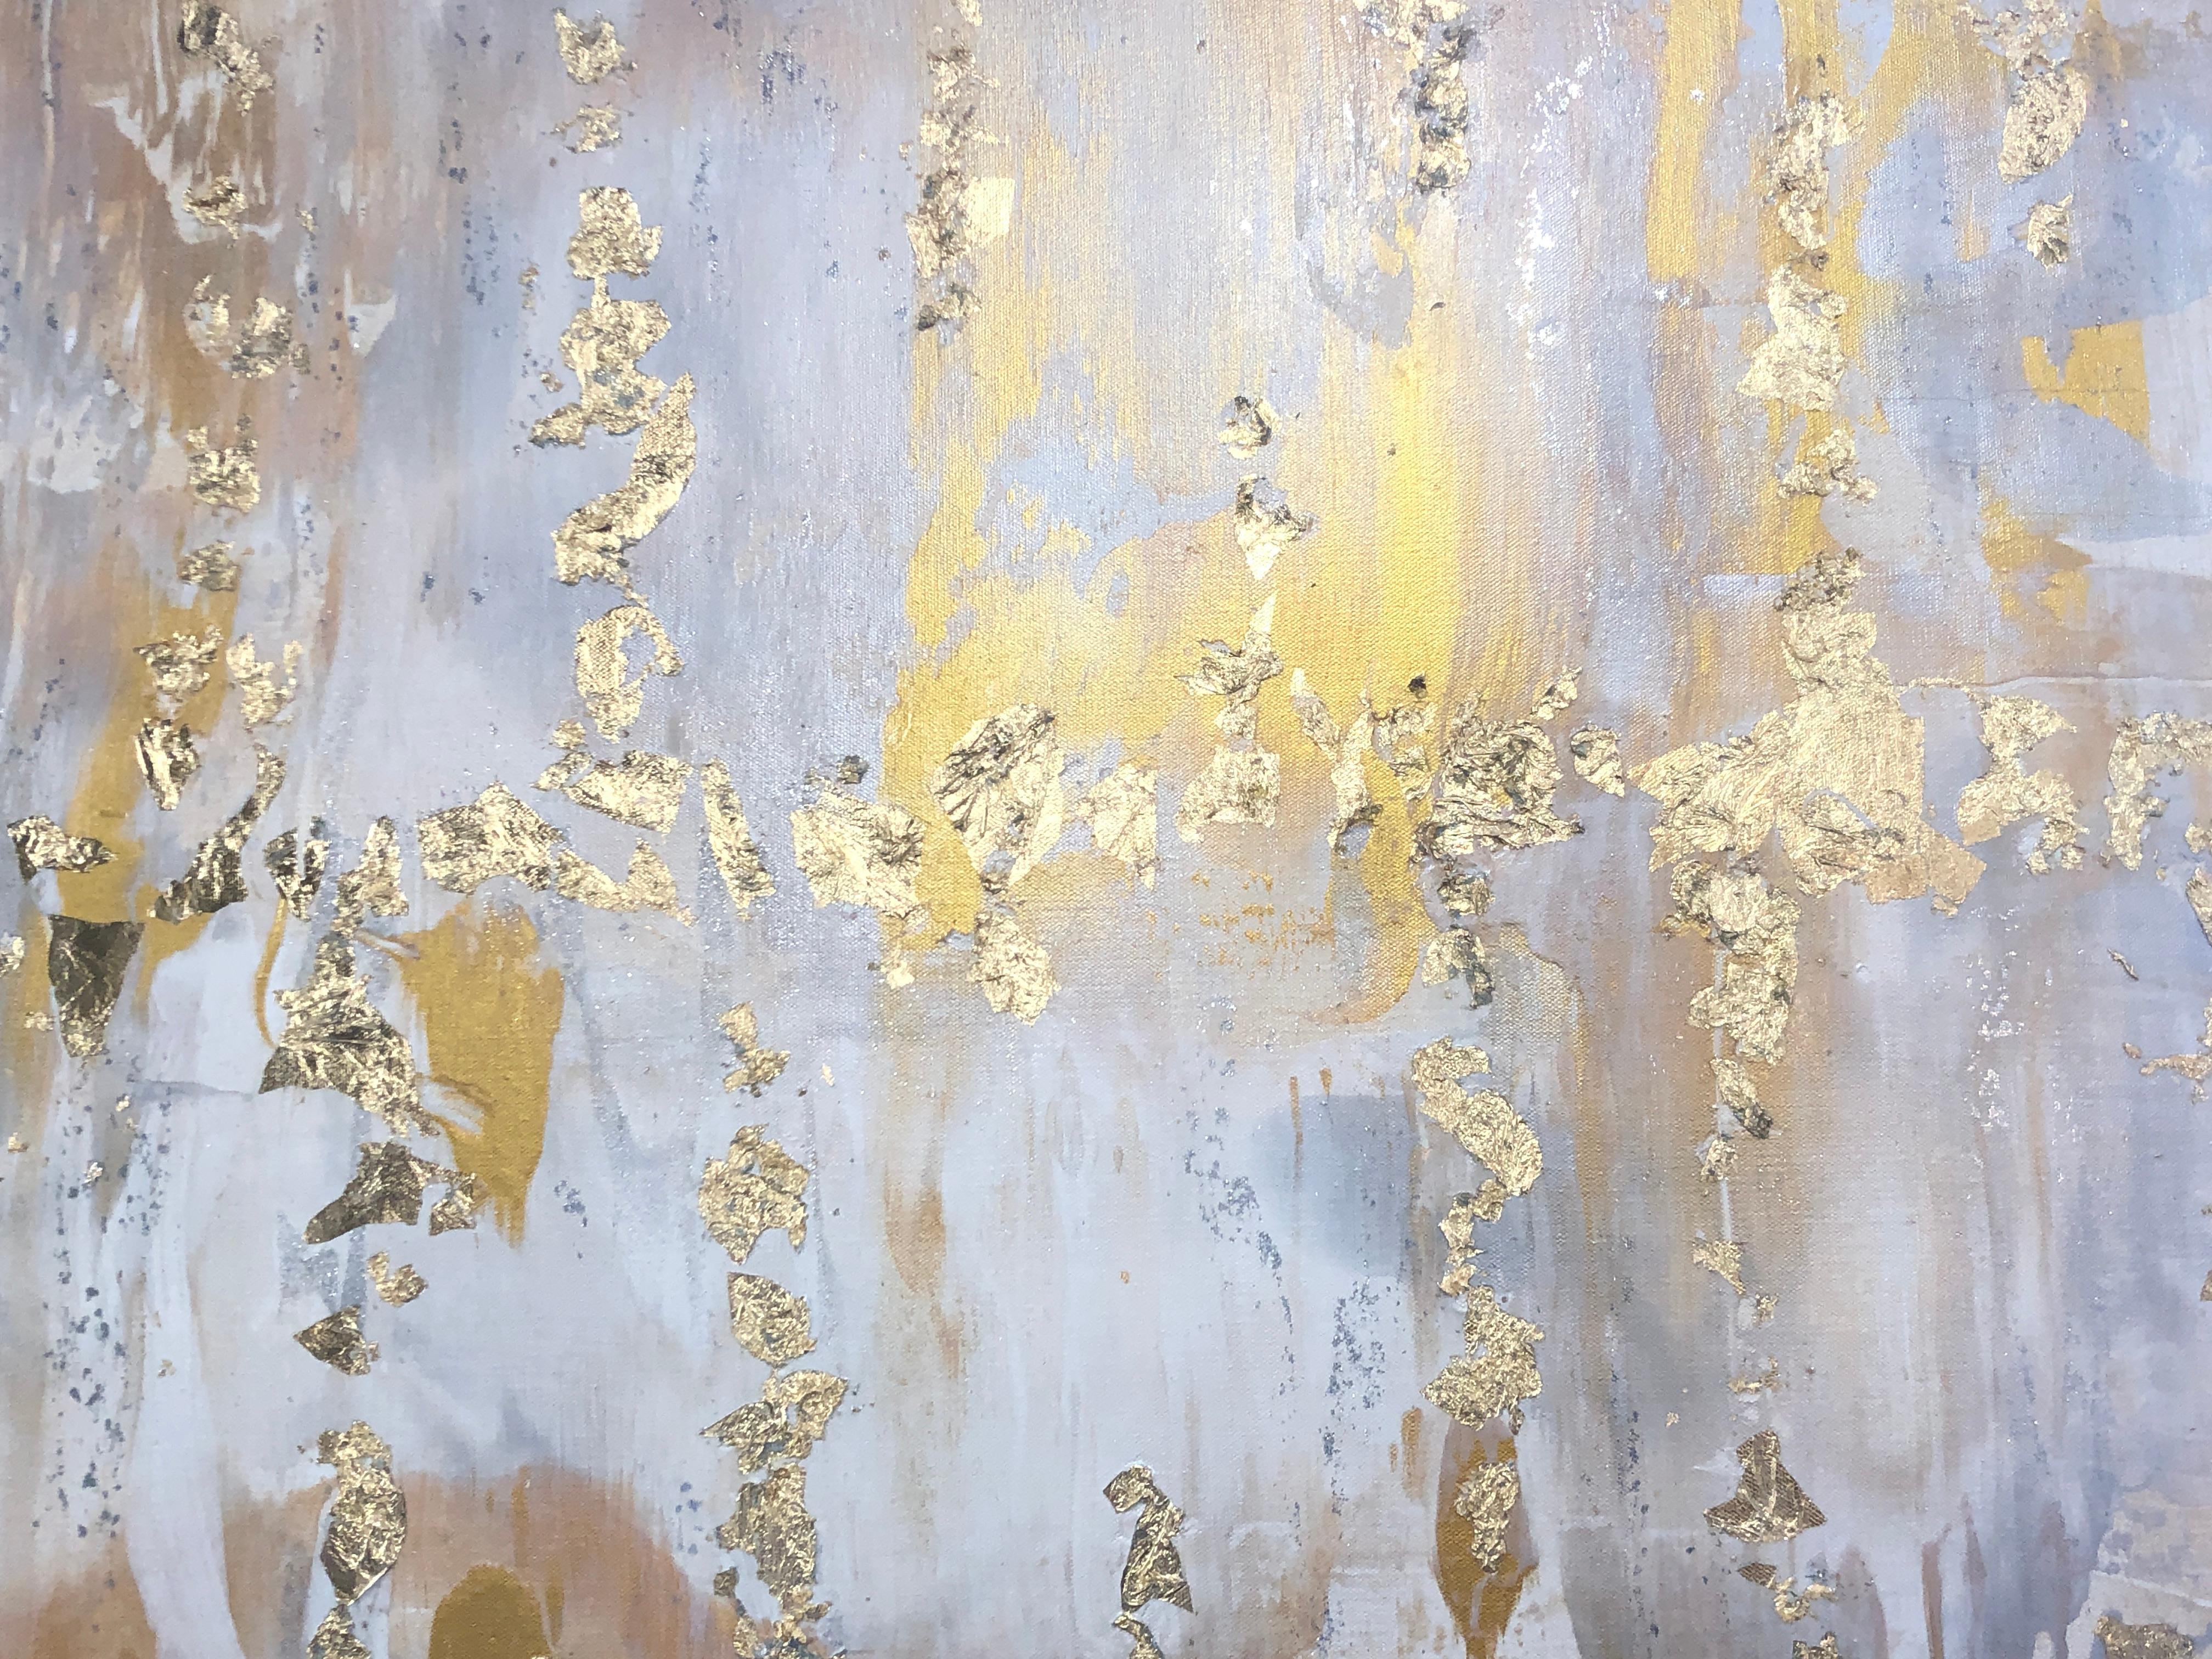 Irena Orlov - Gold Leaf Silver Abstract Art on Canvas 36 x 48